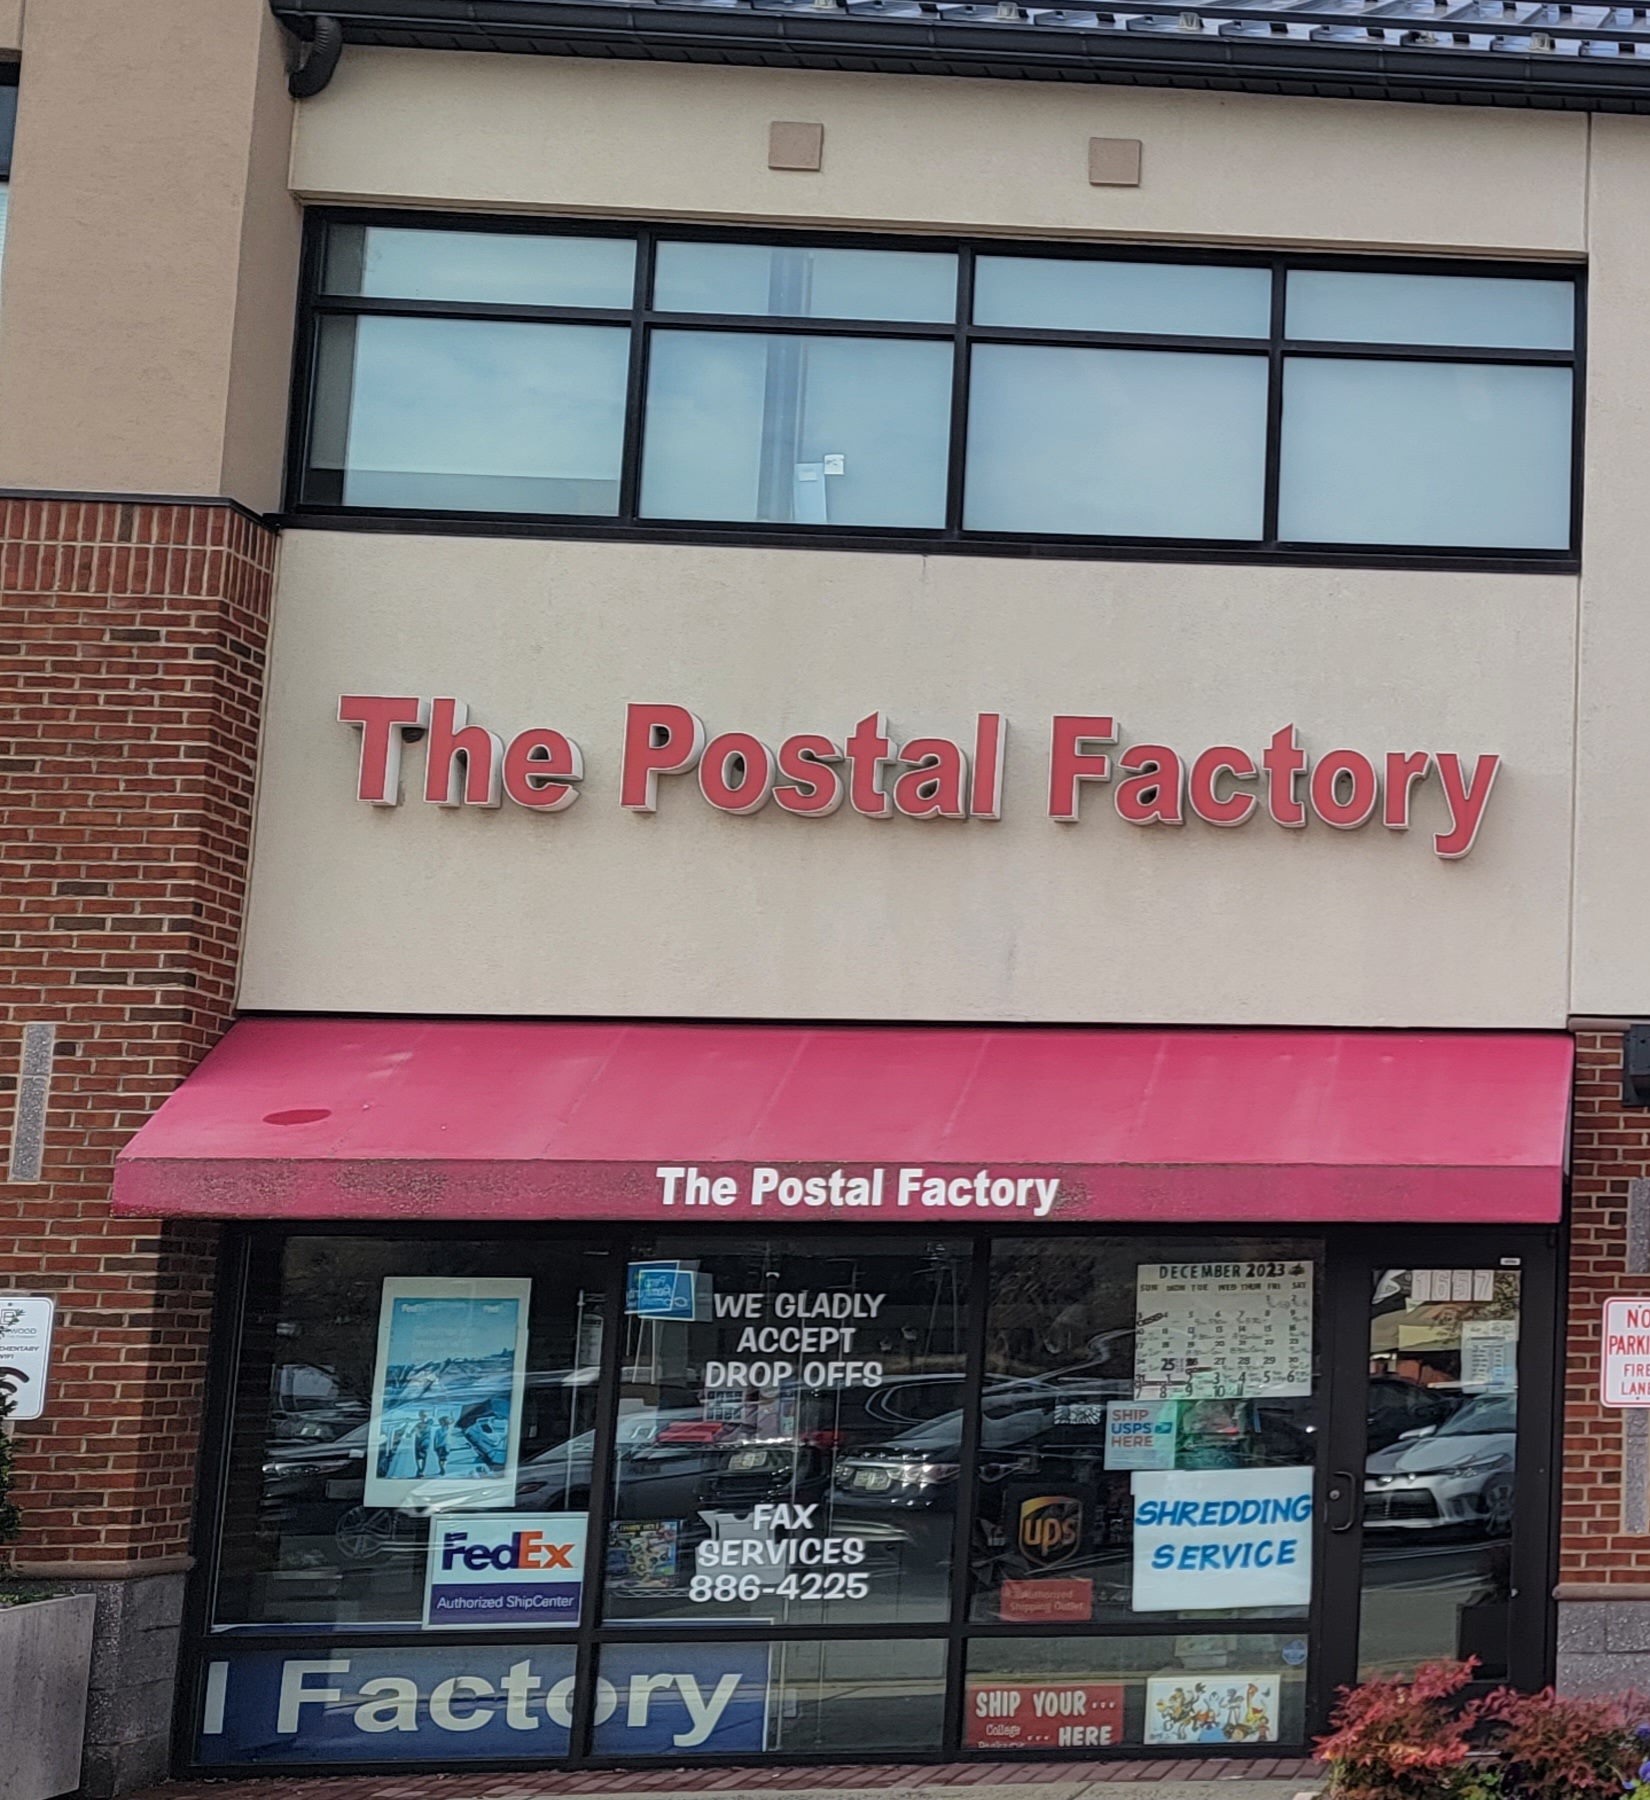 The Postal Factory